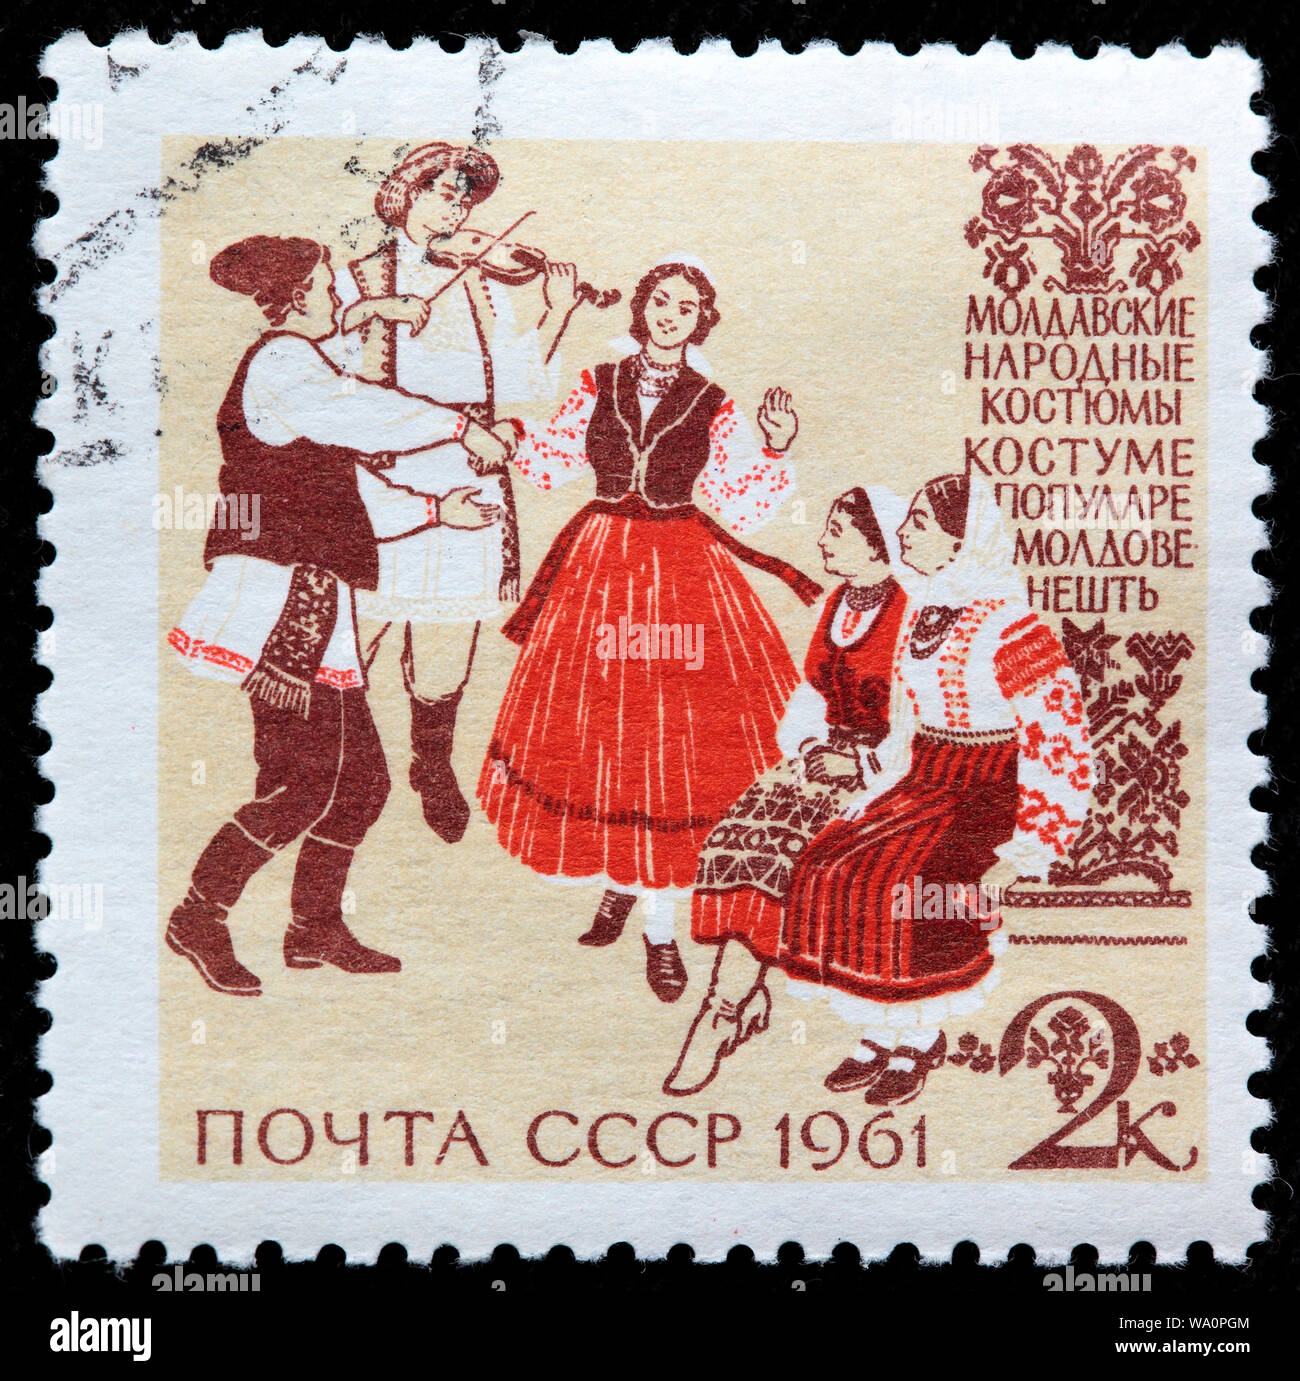 Moldavian national costumes, postage stamp, Russia, USSR, 1961 Stock Photo